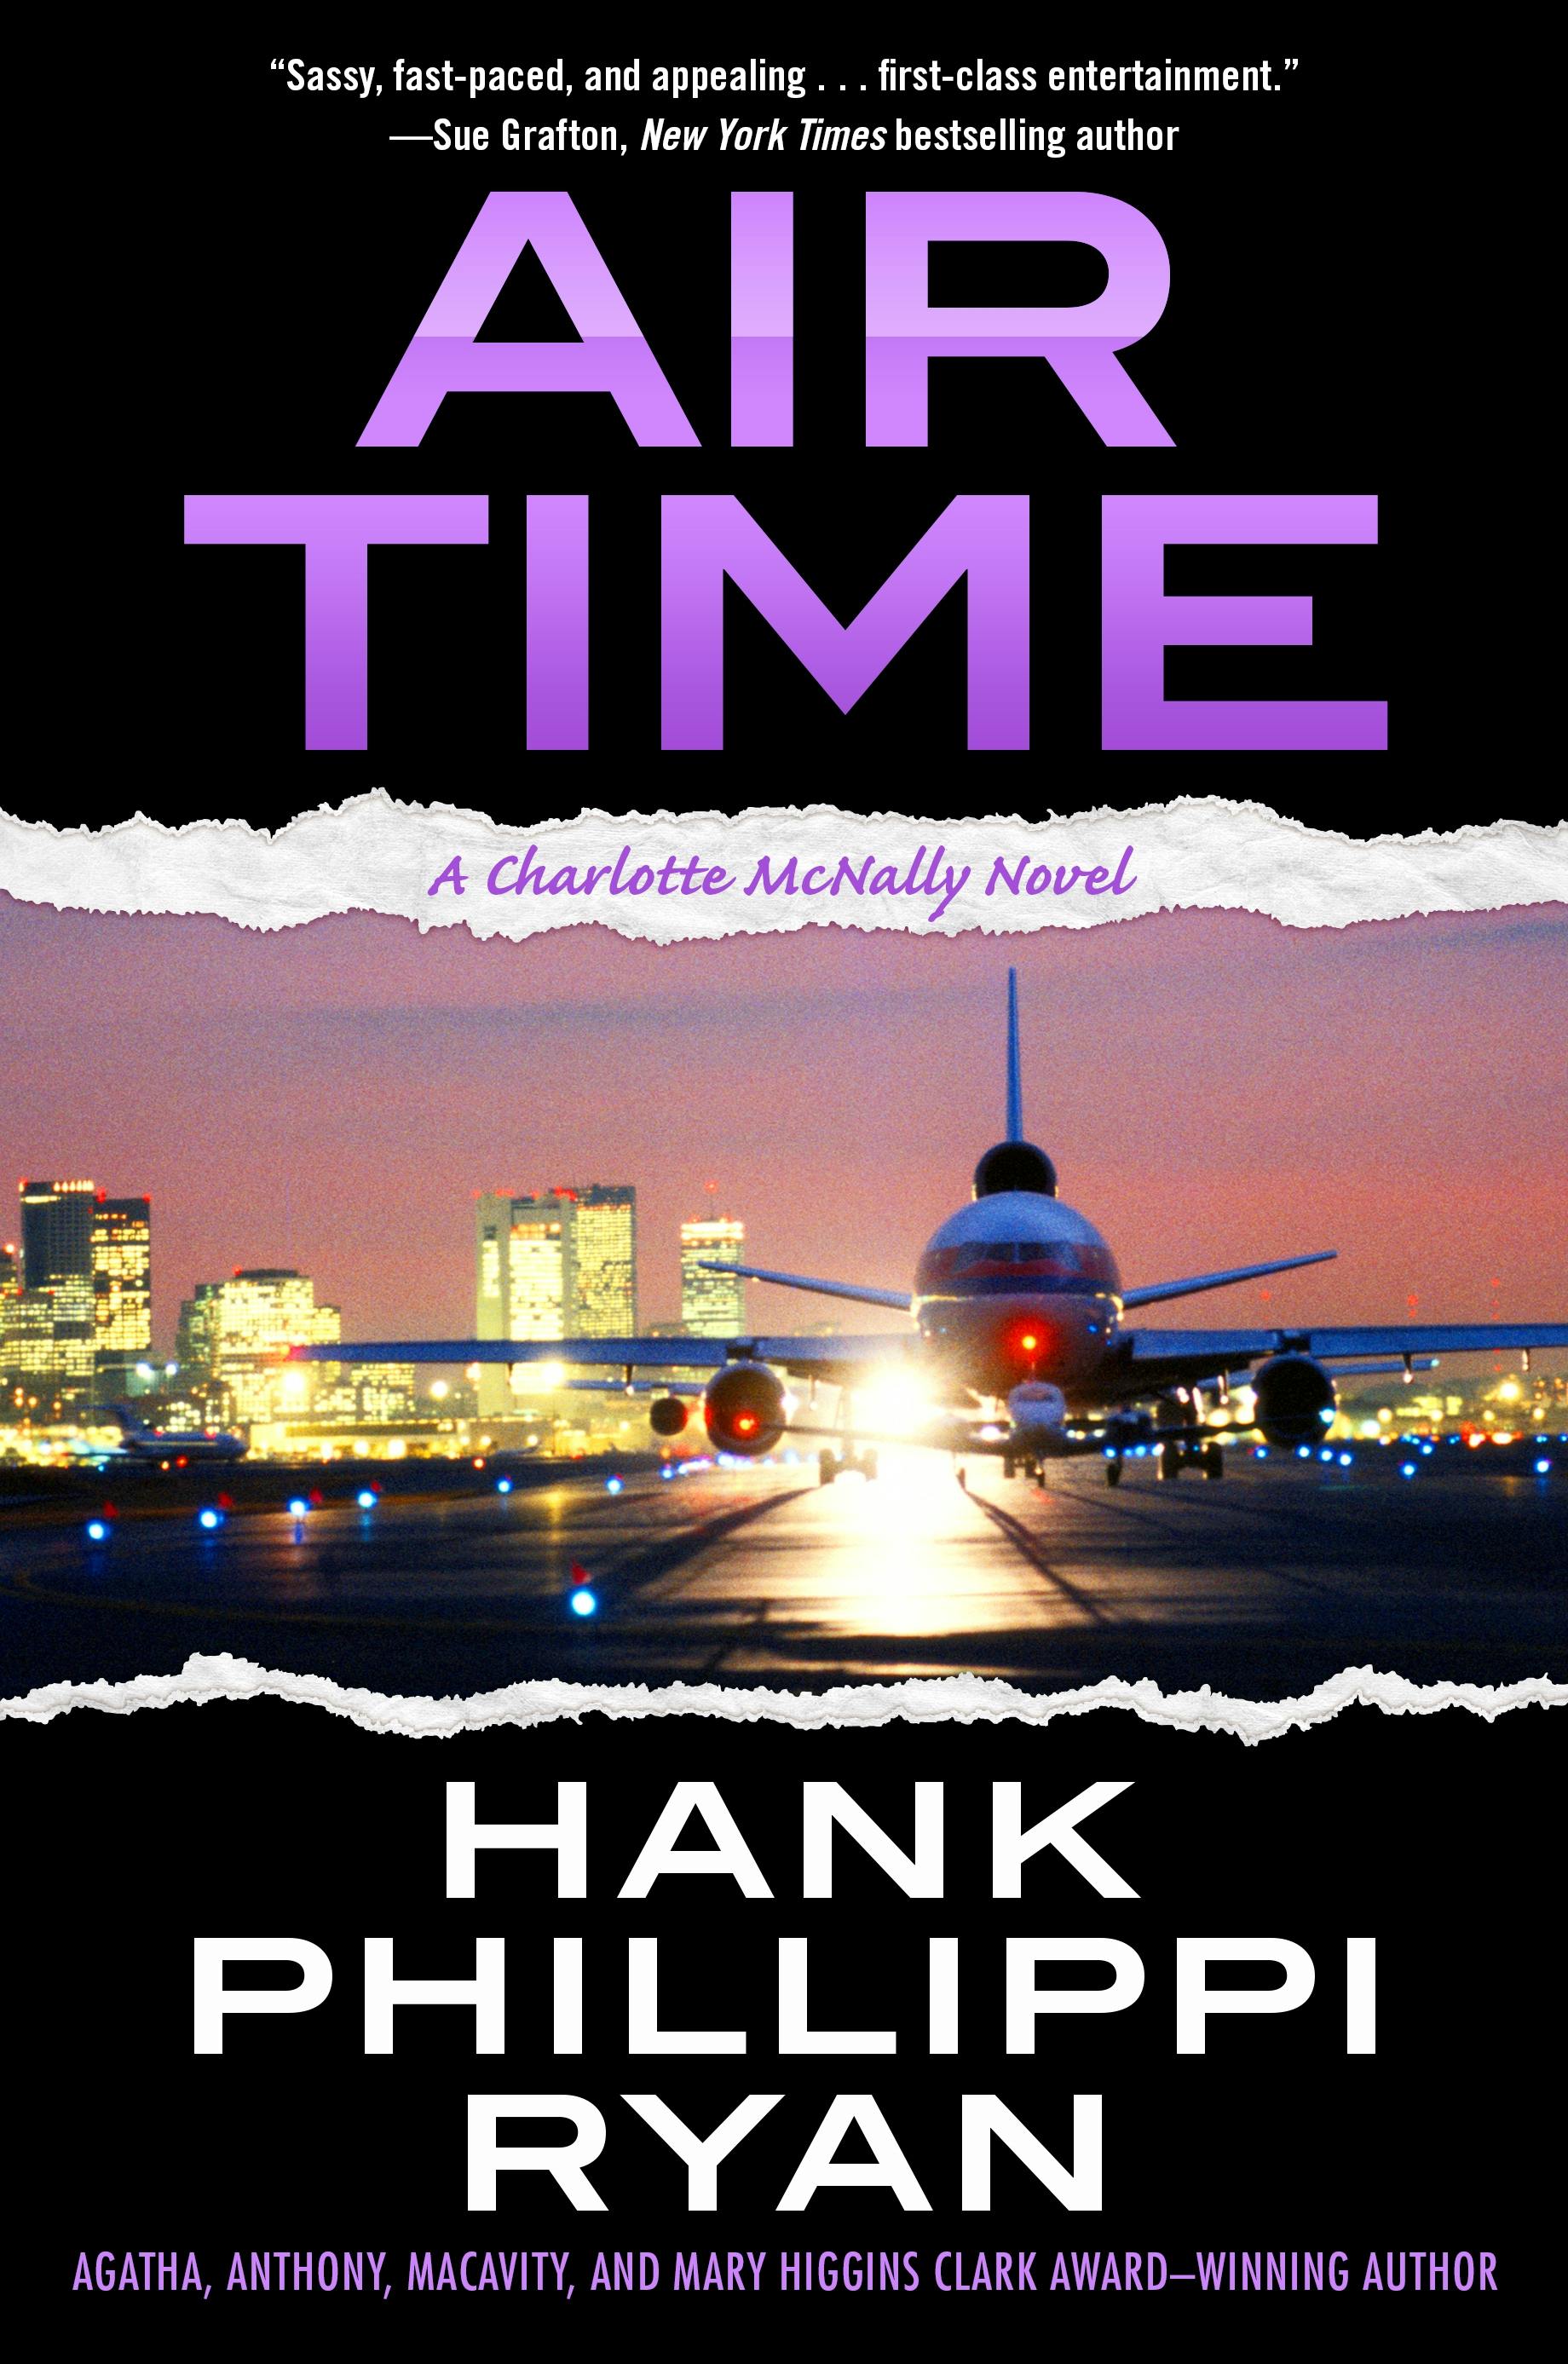 Cover for the book titled as: Air Time